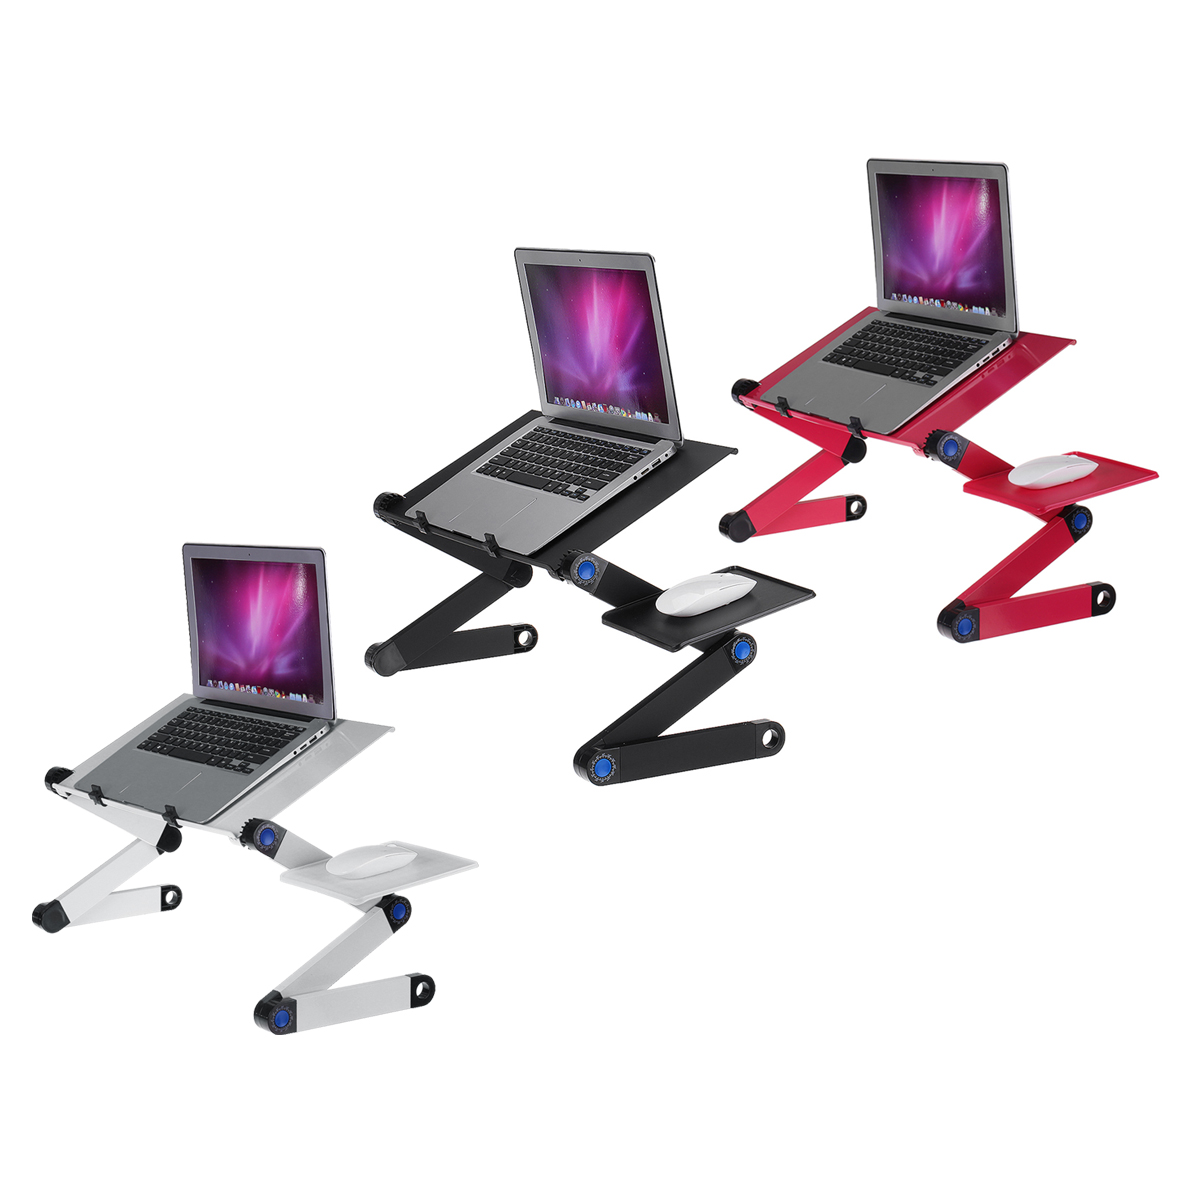 Cooling-Laptop-Desk-360-Degree-Aluminum-Alloy-Adjustable-Foldable-Cooling-Notebook-Table-for-Sofa-Be-1786133-8